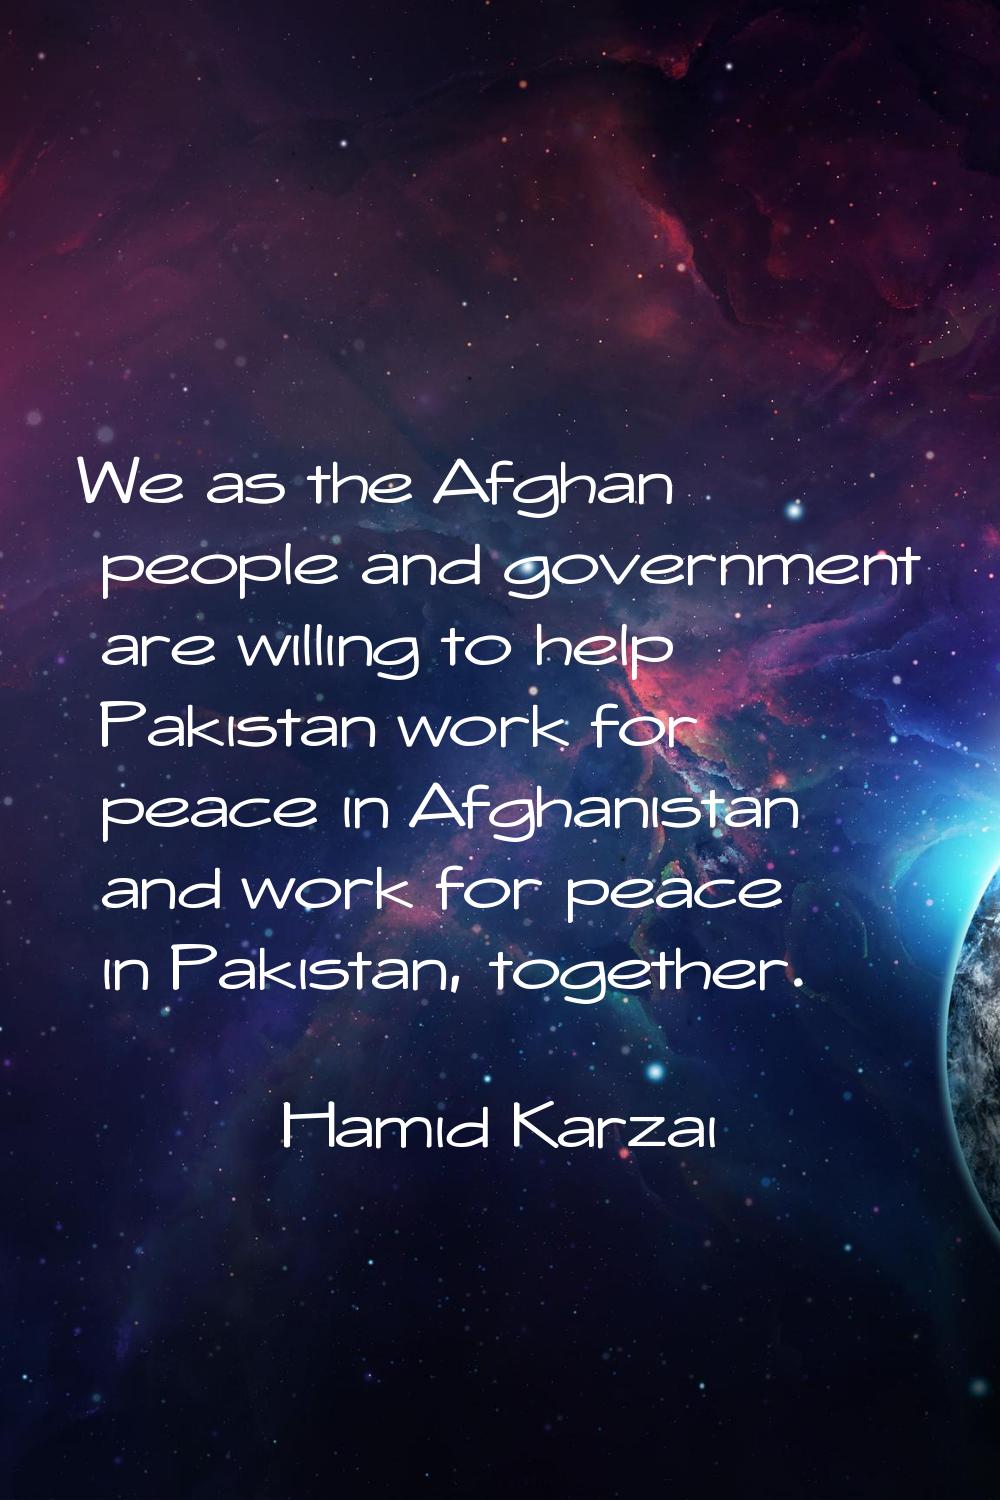 We as the Afghan people and government are willing to help Pakistan work for peace in Afghanistan a